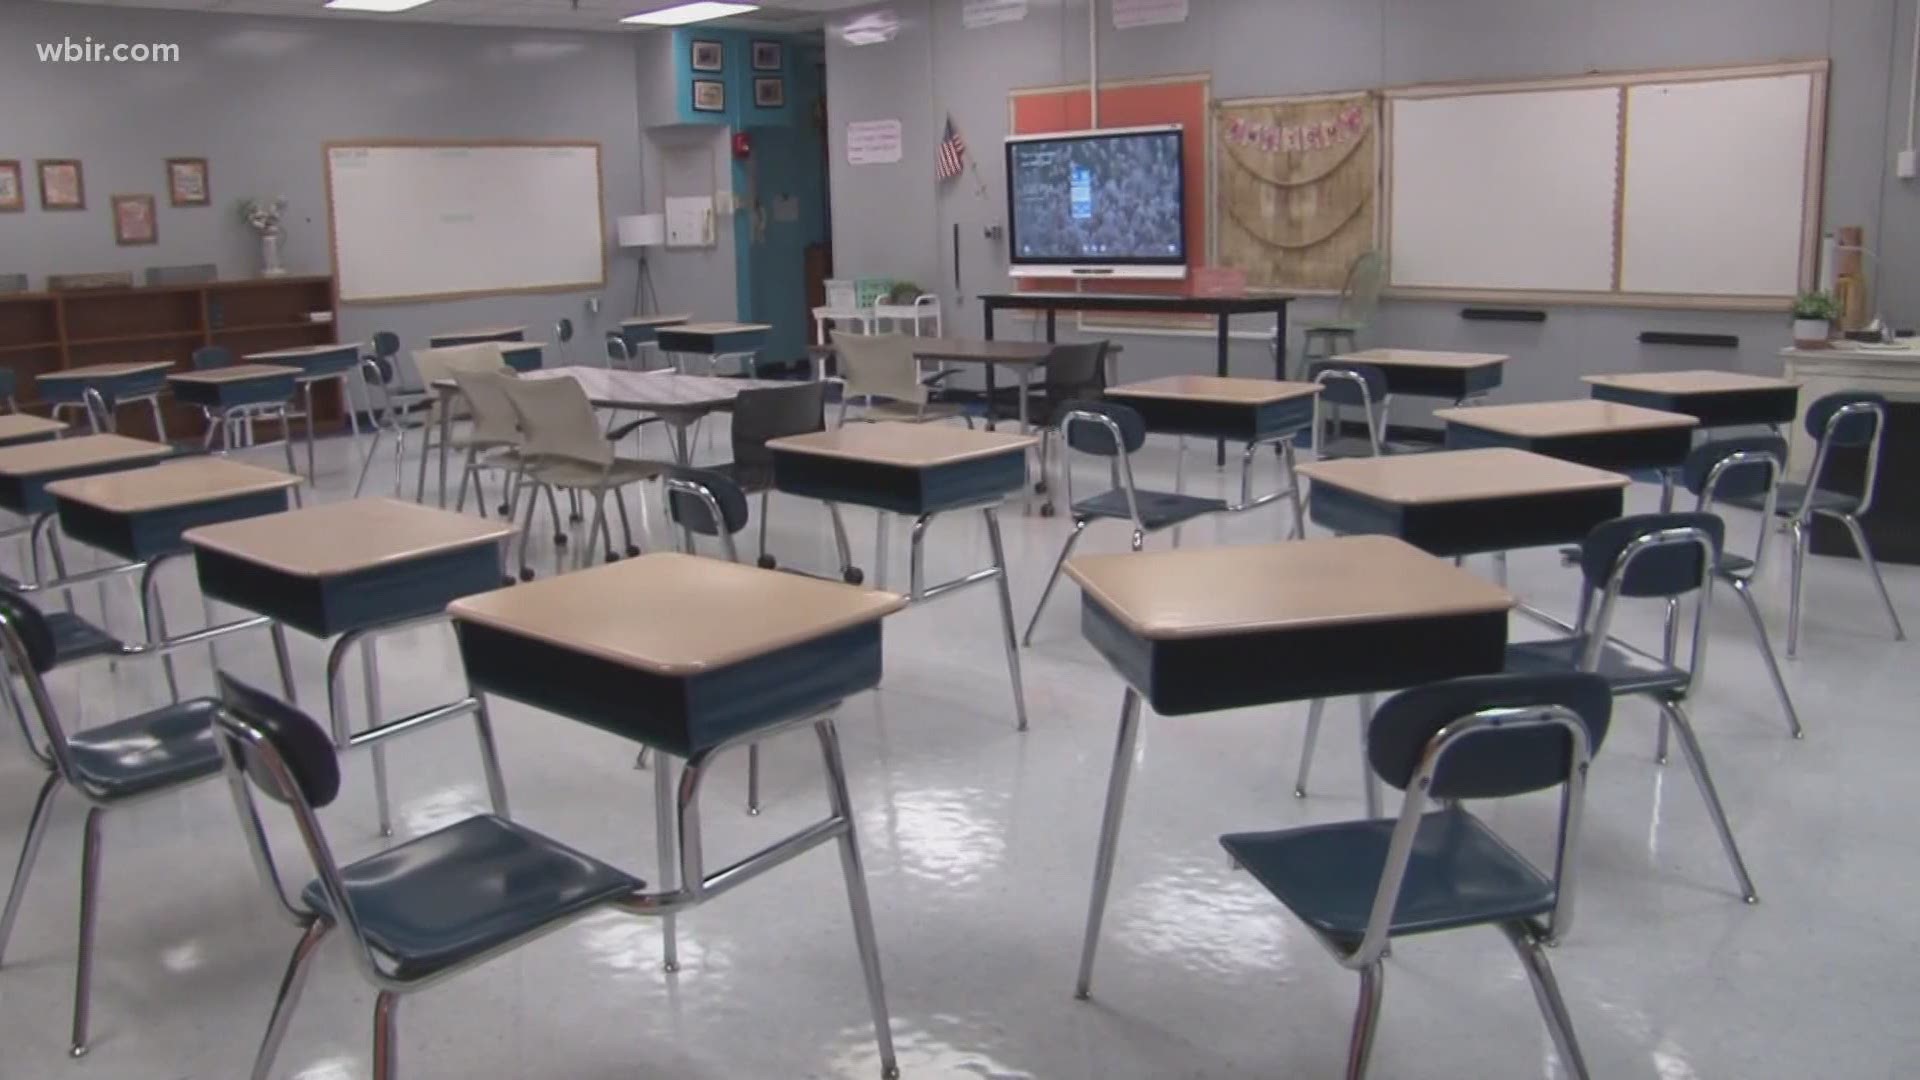 Anderson County School district is preparing to welcome students back to class this fall but of course this school year will look completely different.